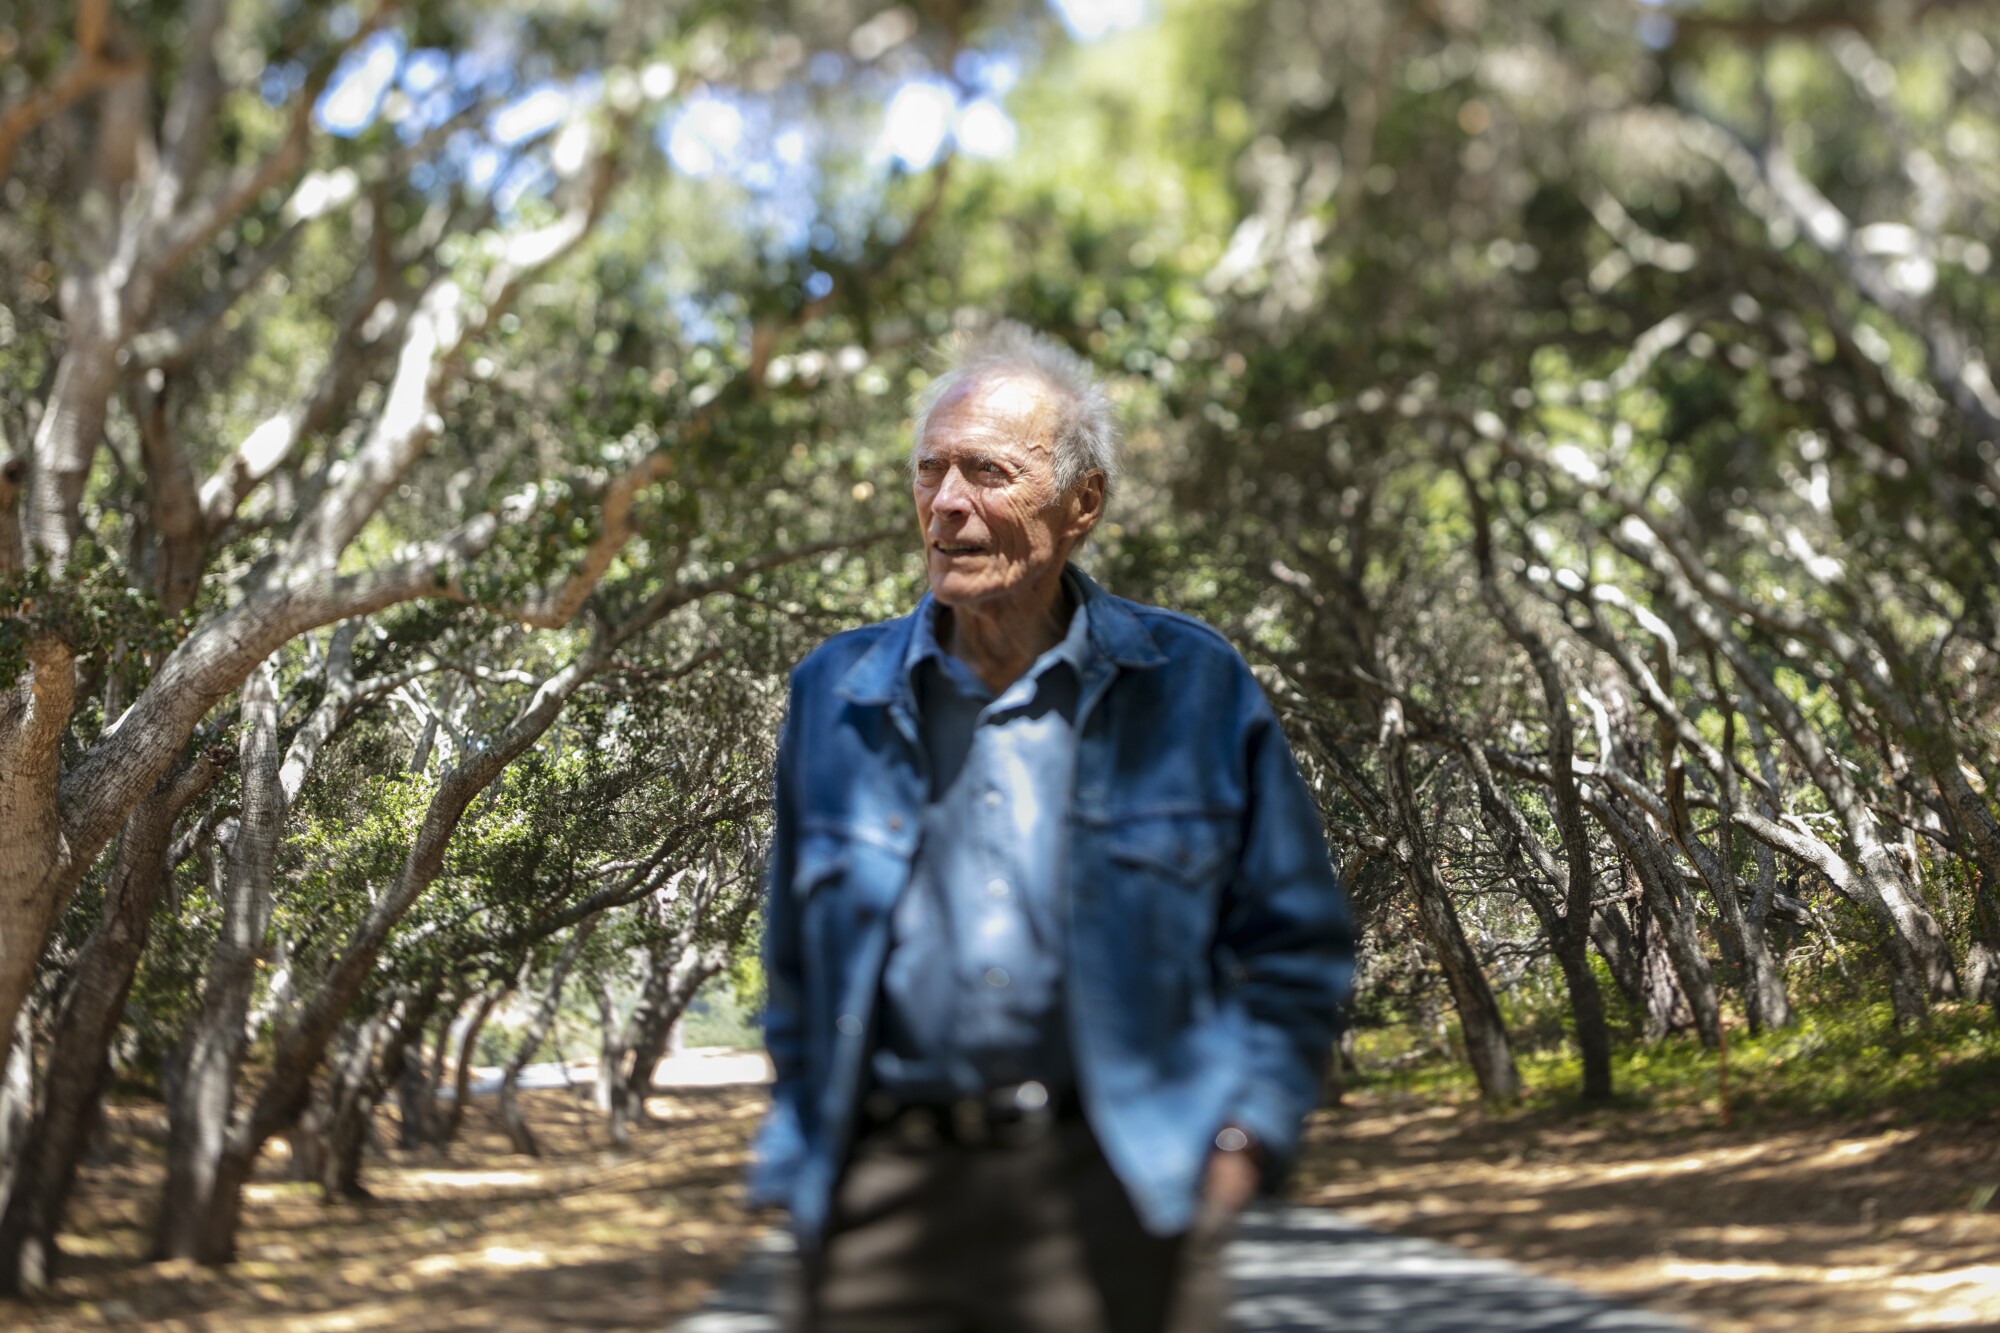 Oscar-winning director Clint Eastwood, 91, is photographed with a tilt-shift lens, on the grounds of his Tehama Golf Club